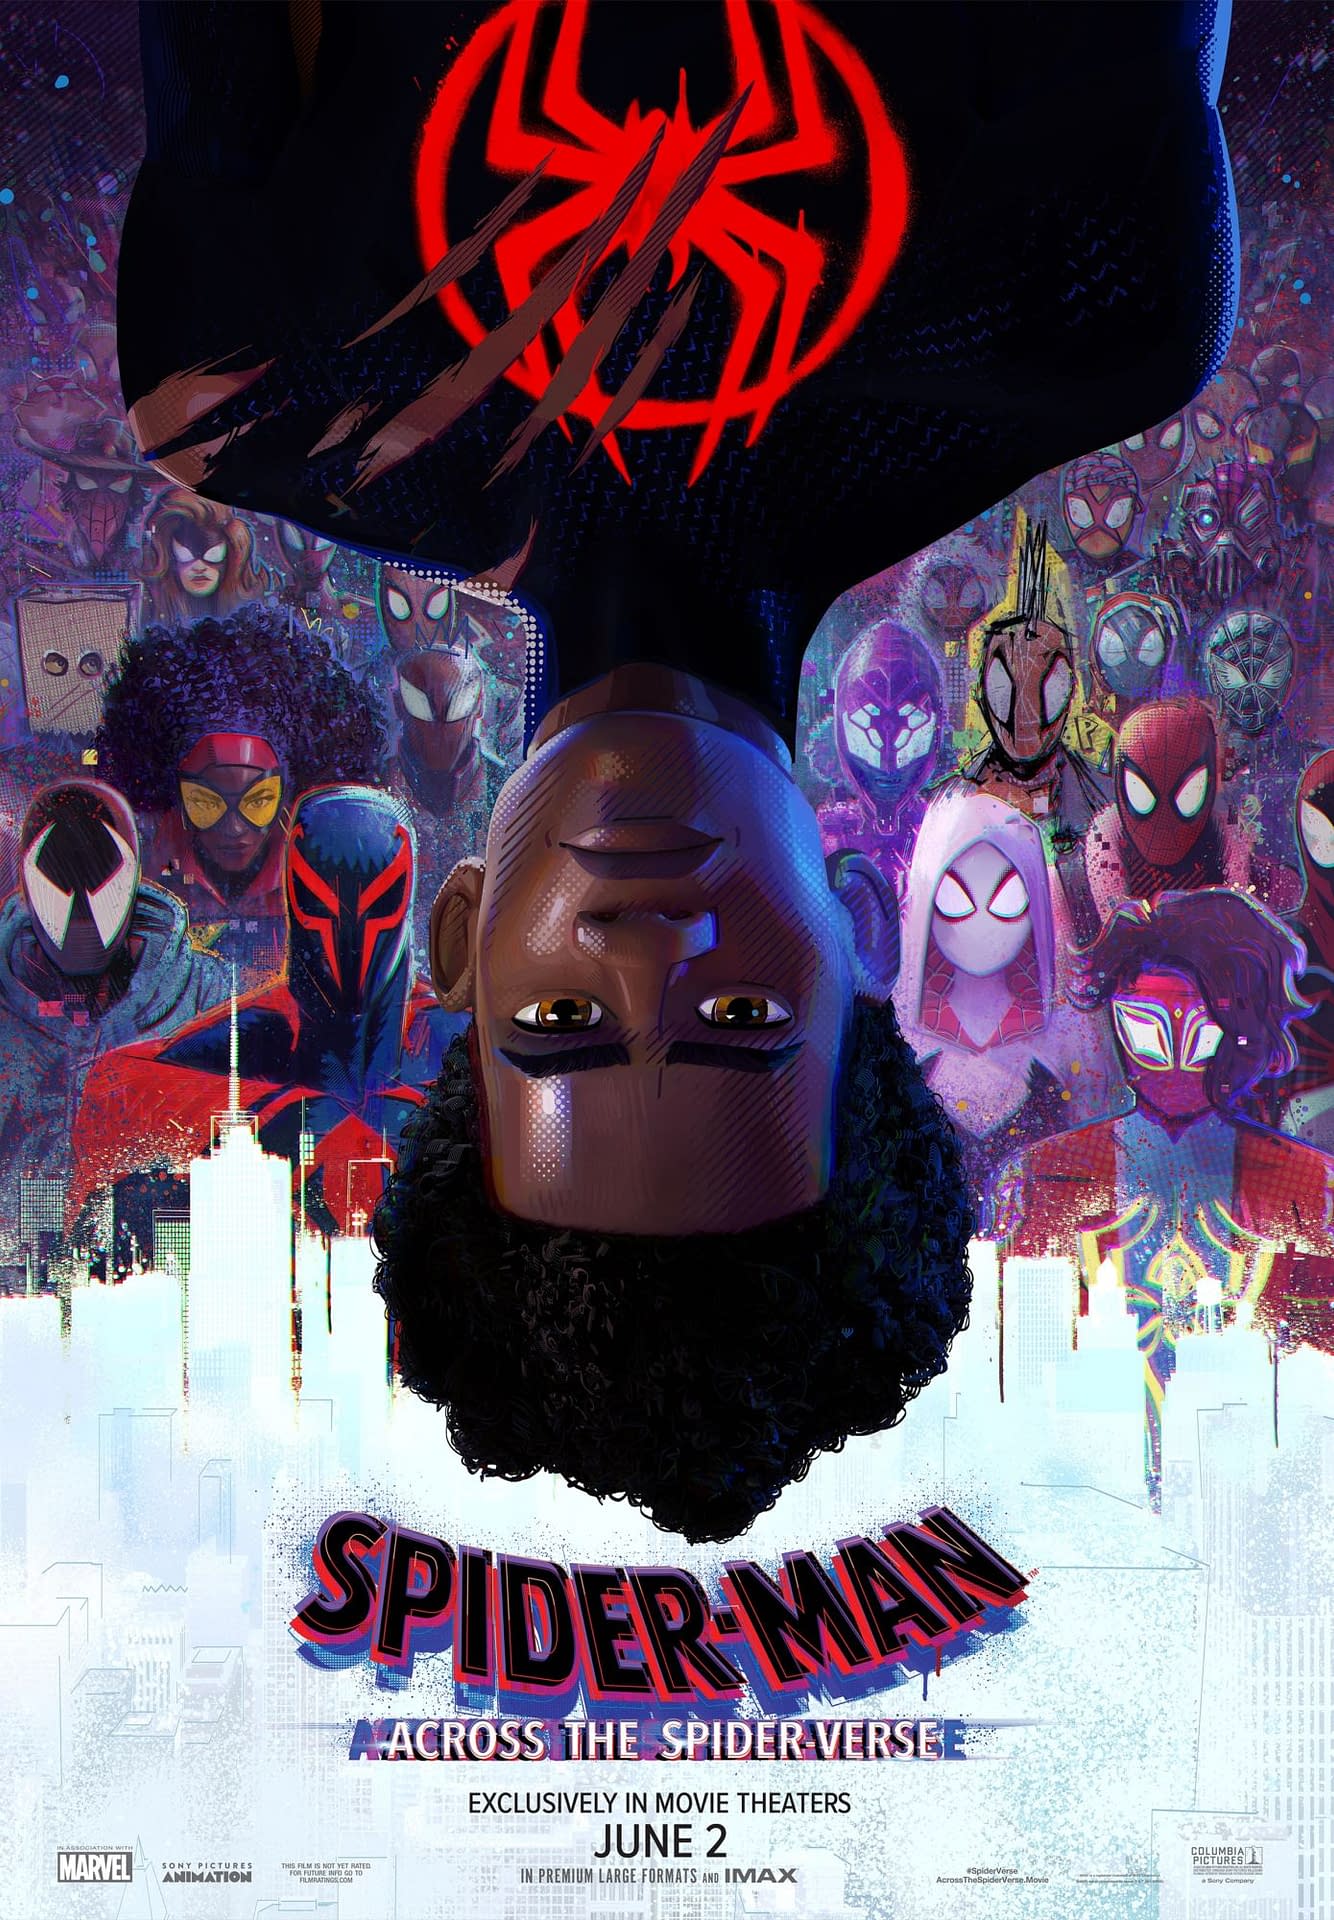 Spider Man: Across The Spider Verse Poster And Image Released